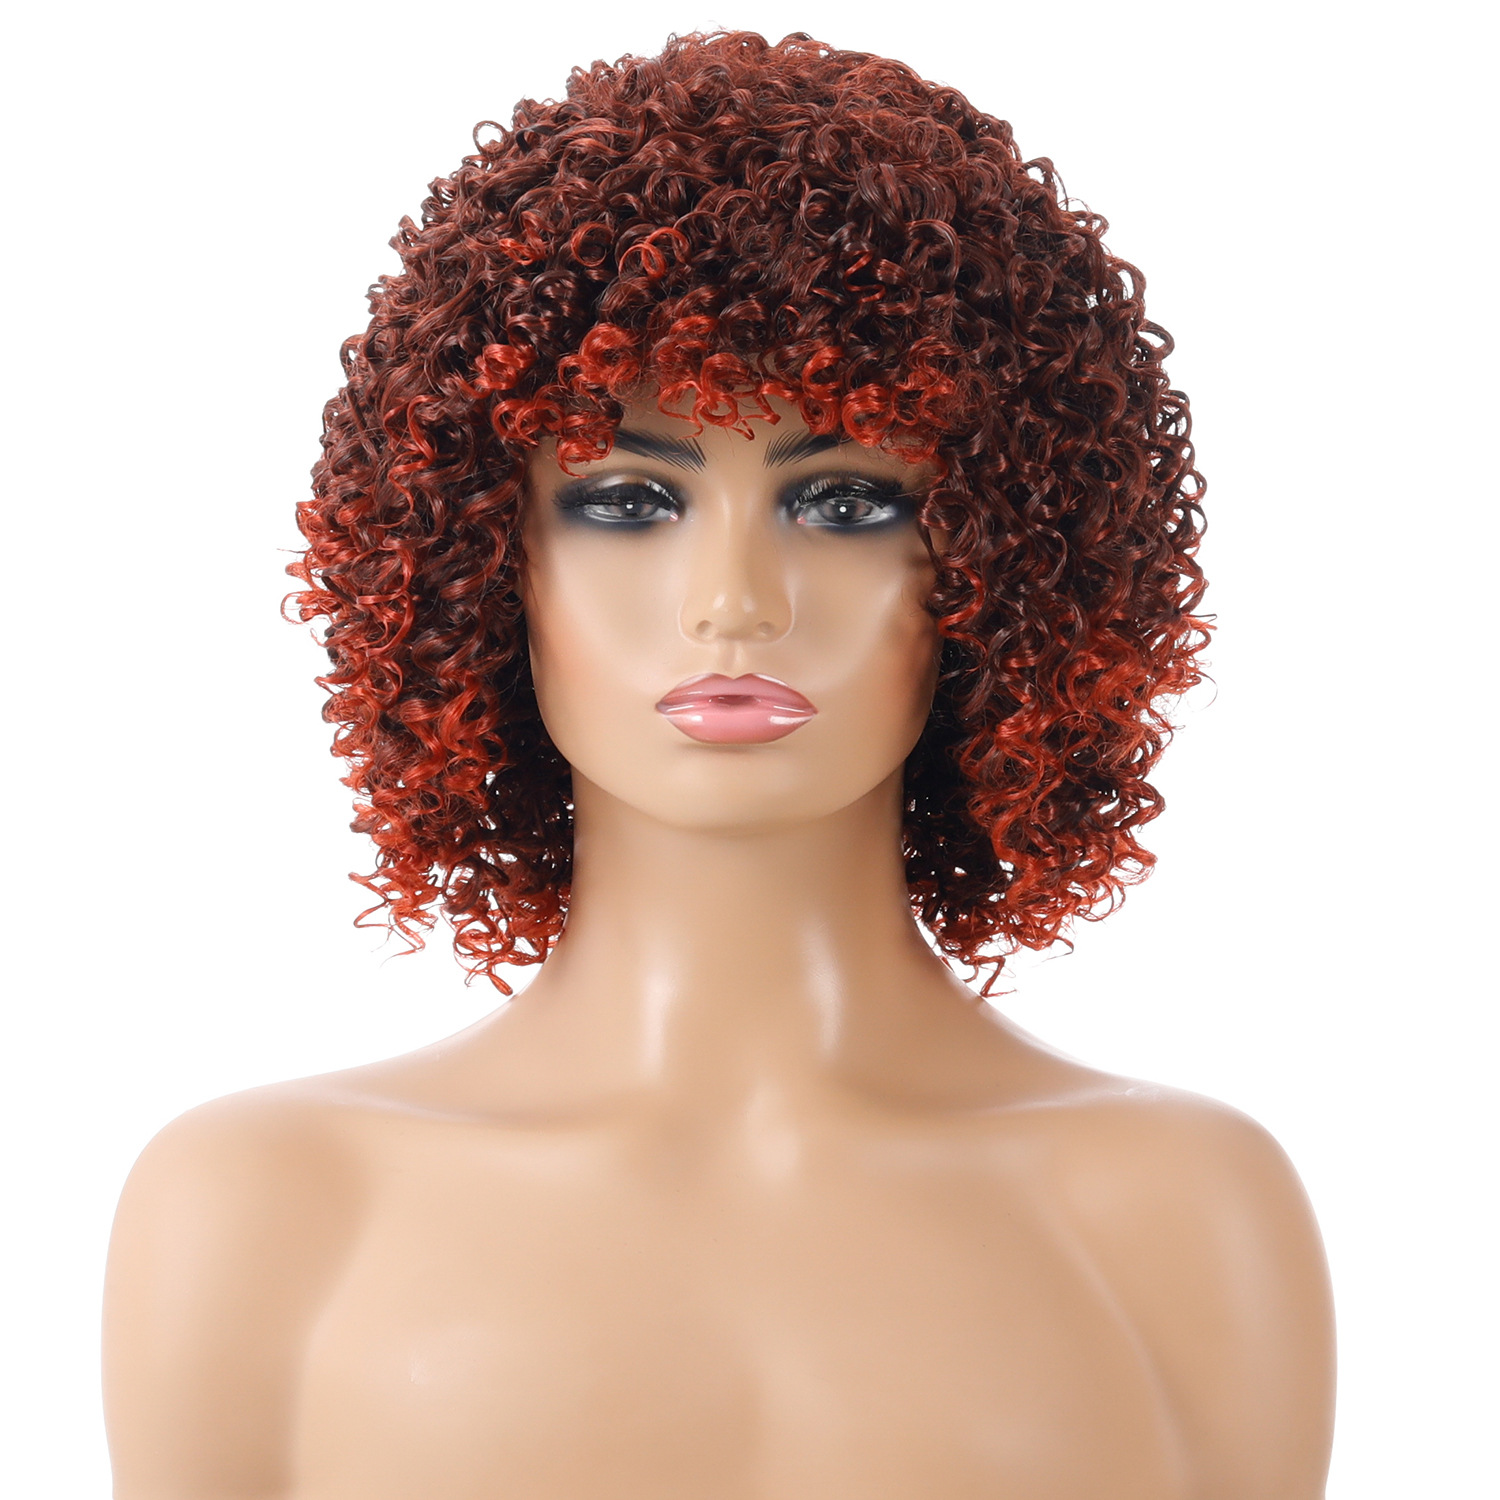 A synthetic wig styled with small curls in a range of vibrant colors